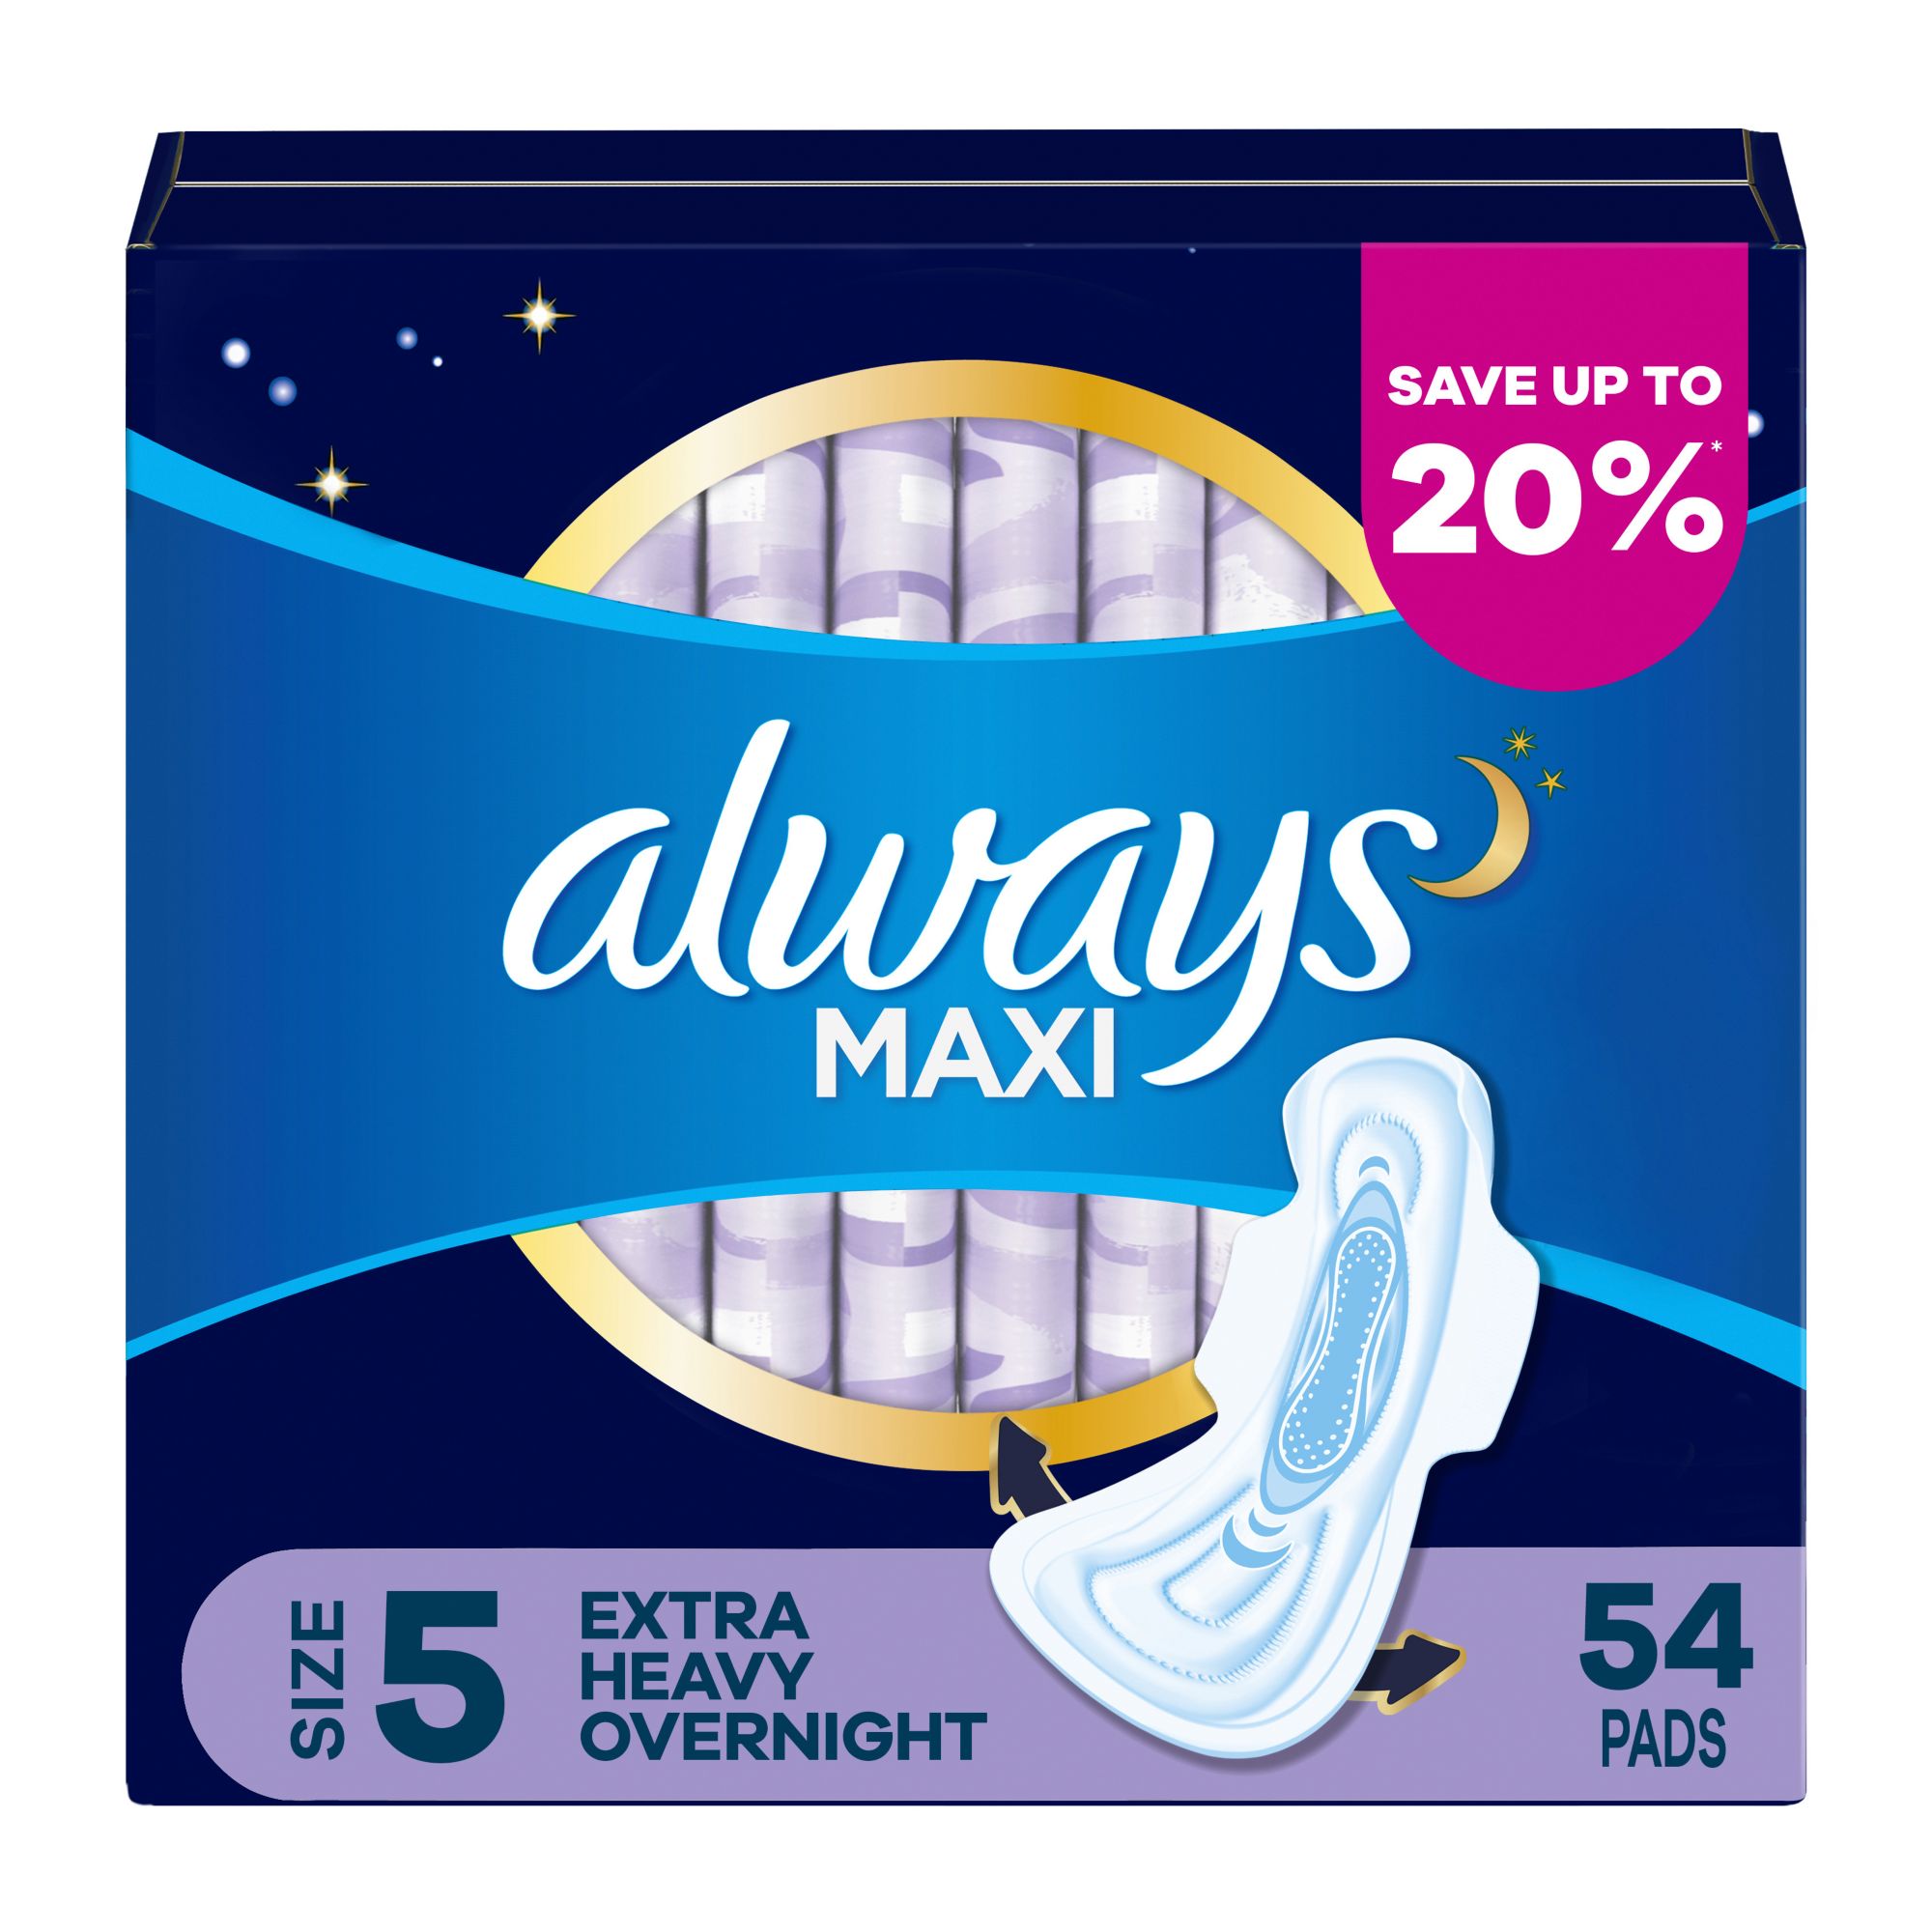 L. - Extra Long Ultra Thin Pads,Overnight - Save-On-Foods